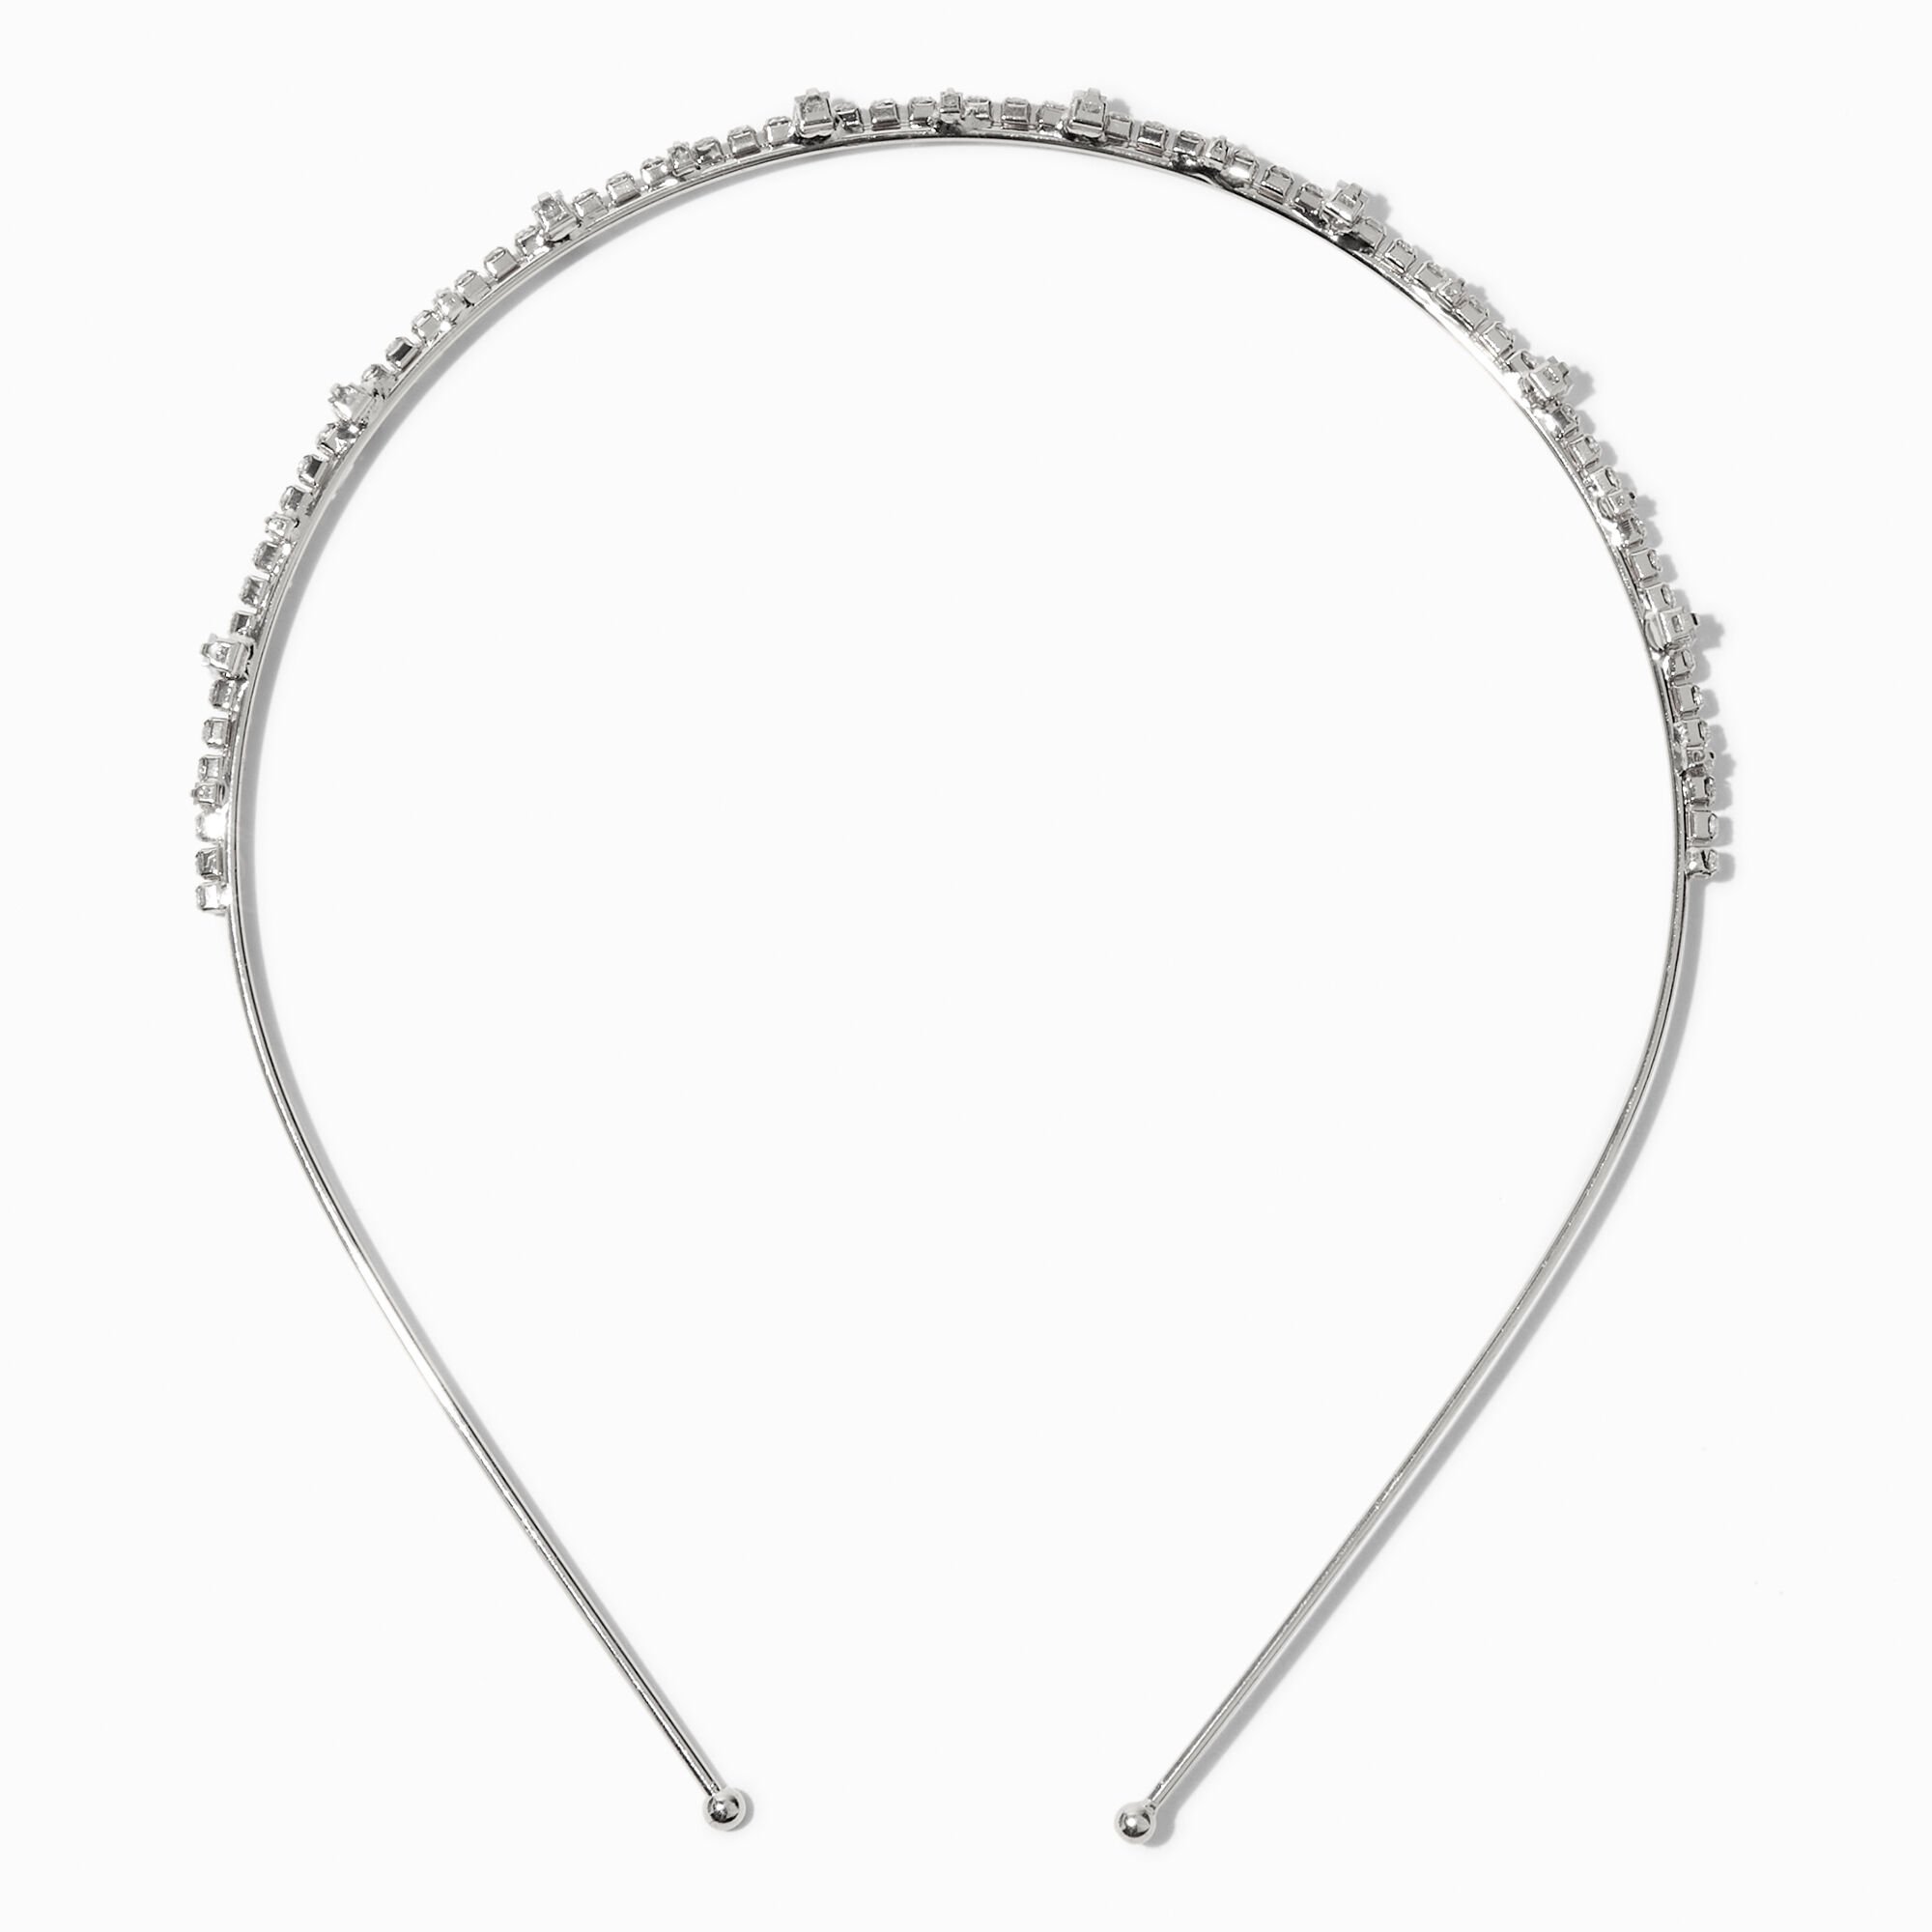 View Claires Tone Square Cubic Zirconia Headband Silver information